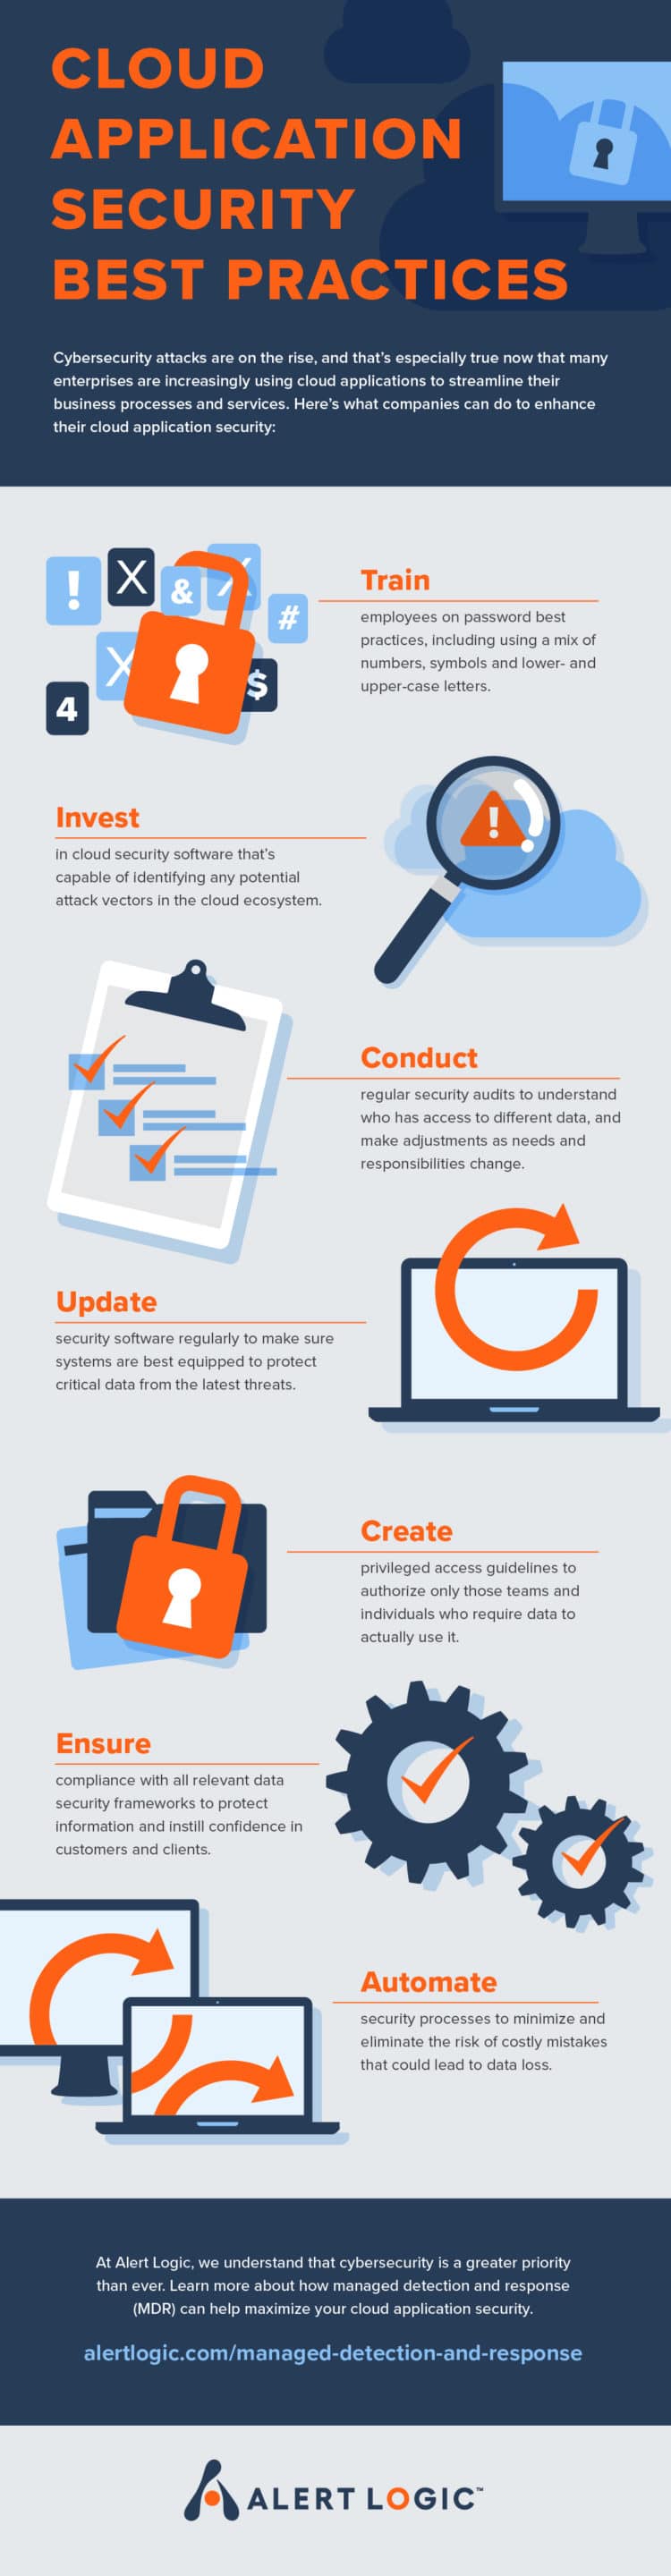 Cloud Application Security Best Practices Infographic